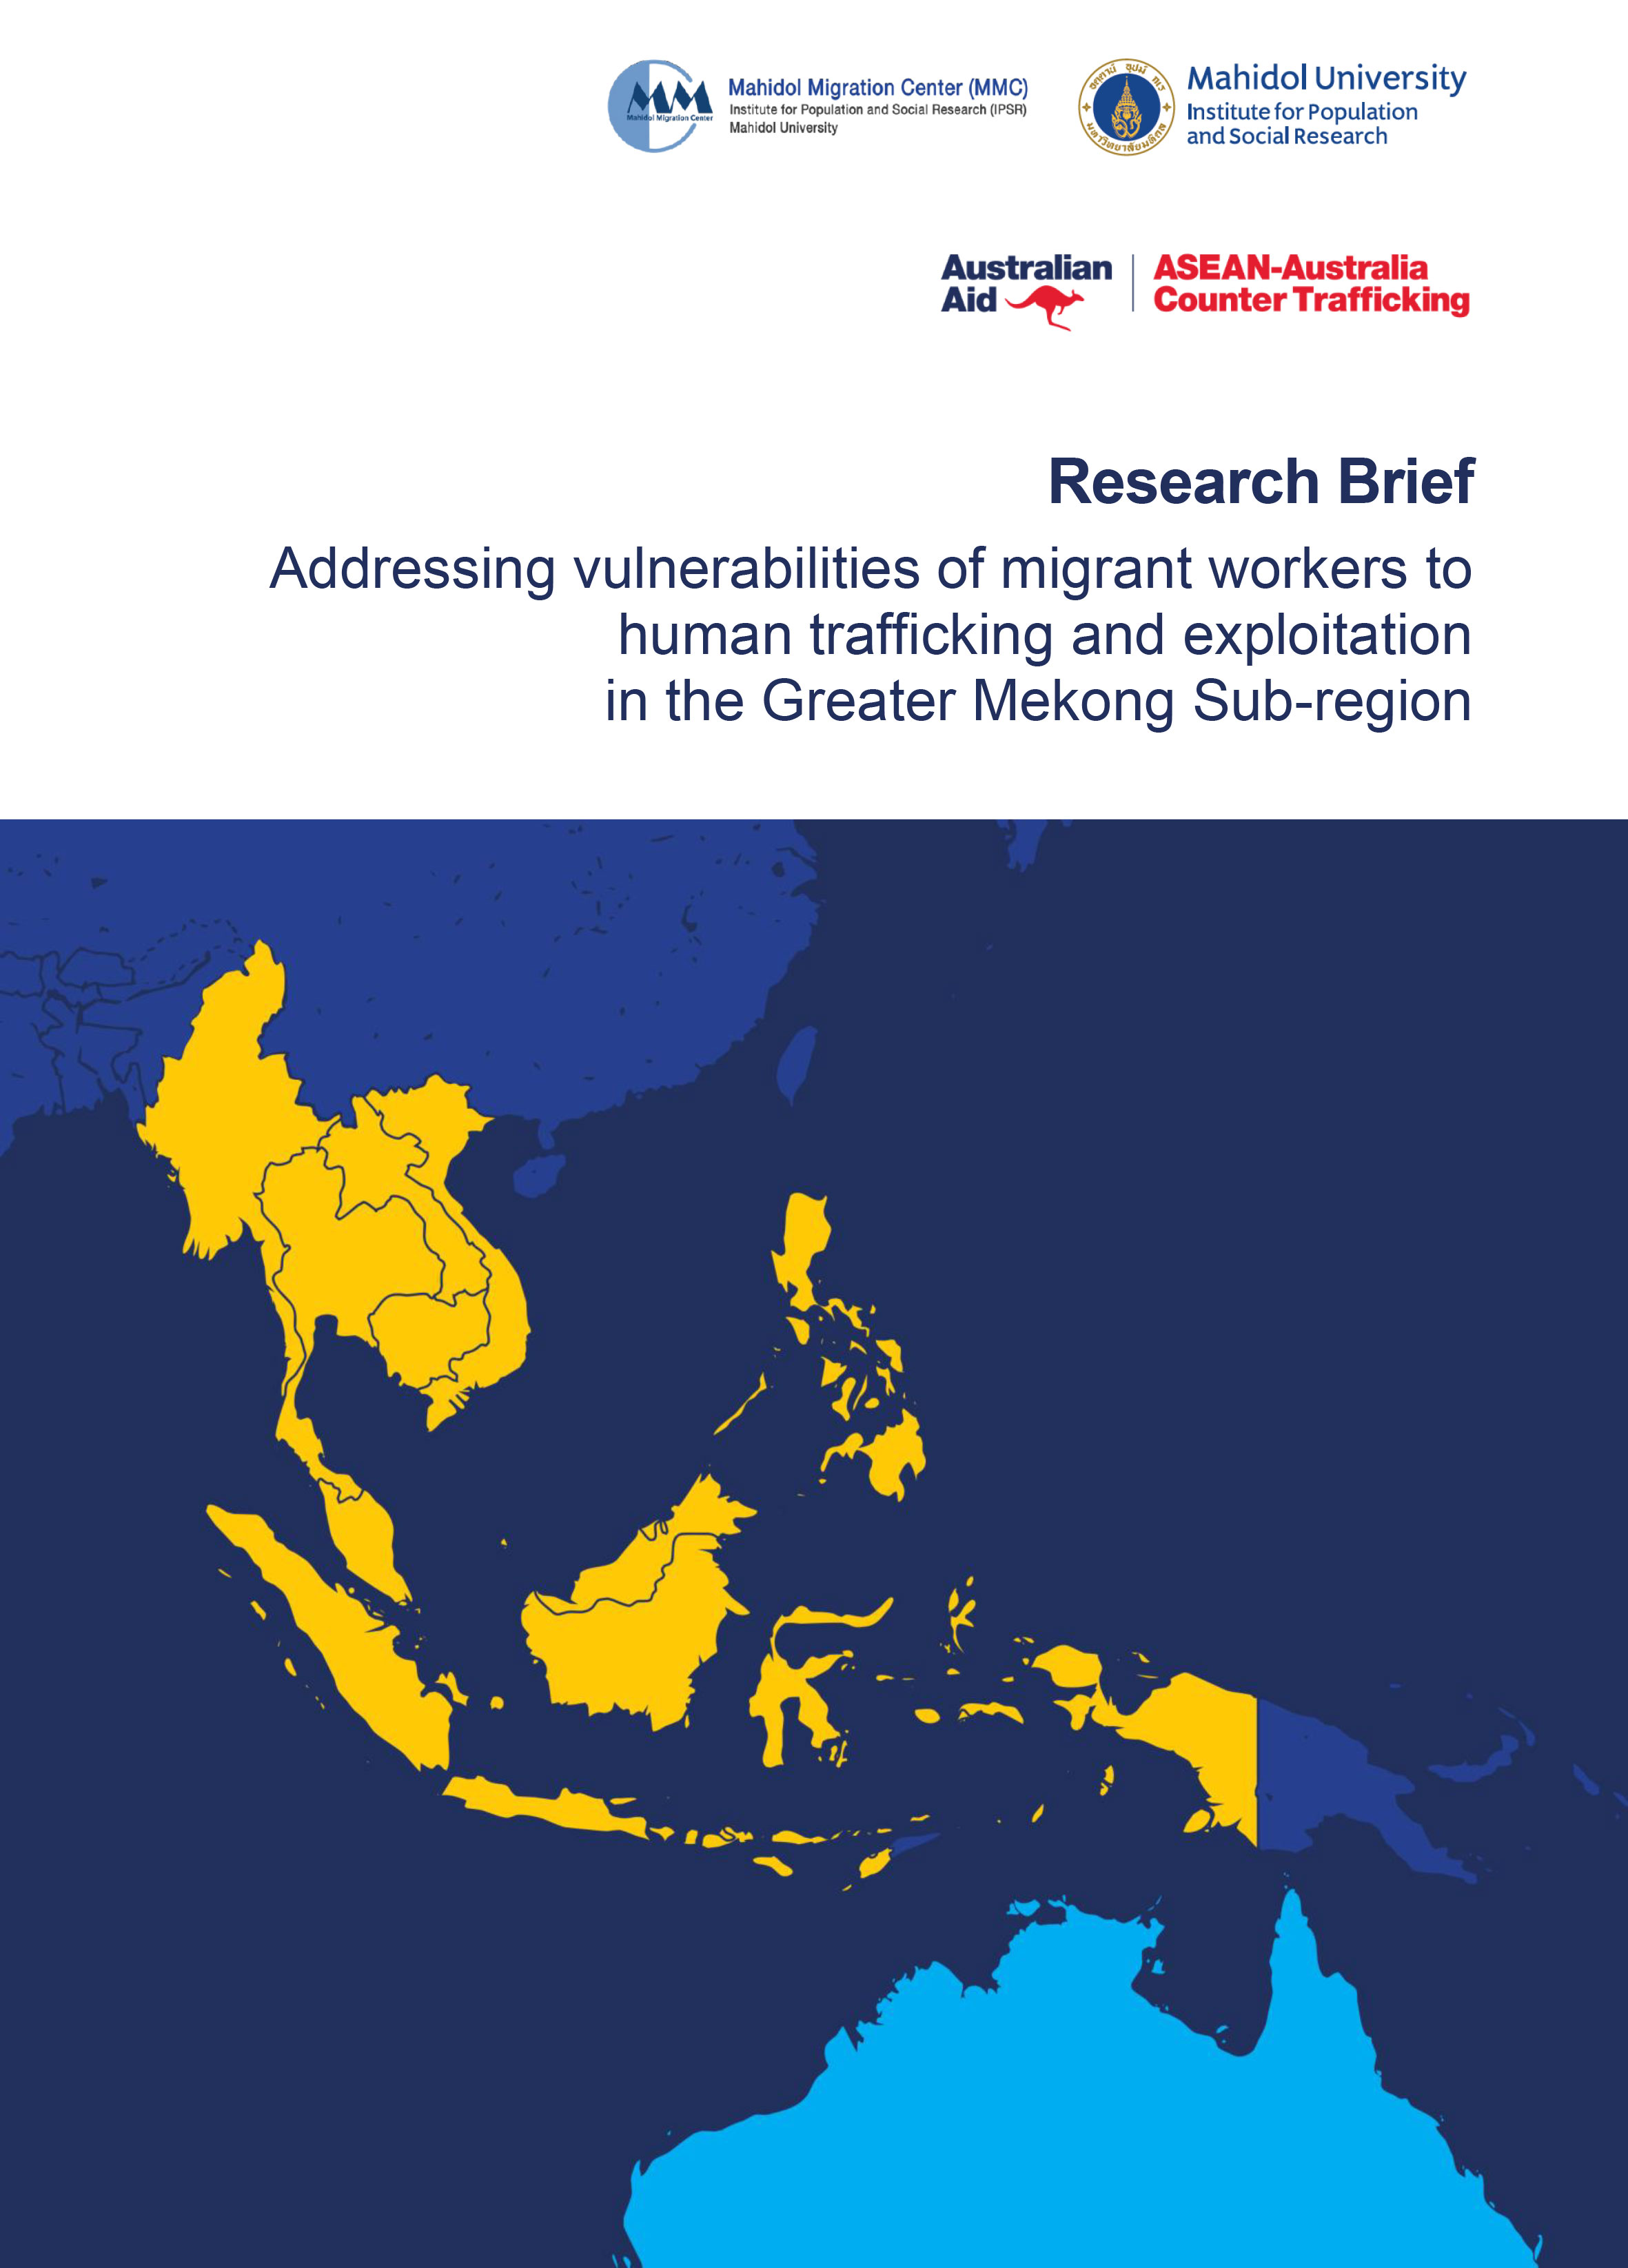 Addressing vulnerabilities of migrant workers to human trafficking and exploitation in the Greater Mekong Sub-region